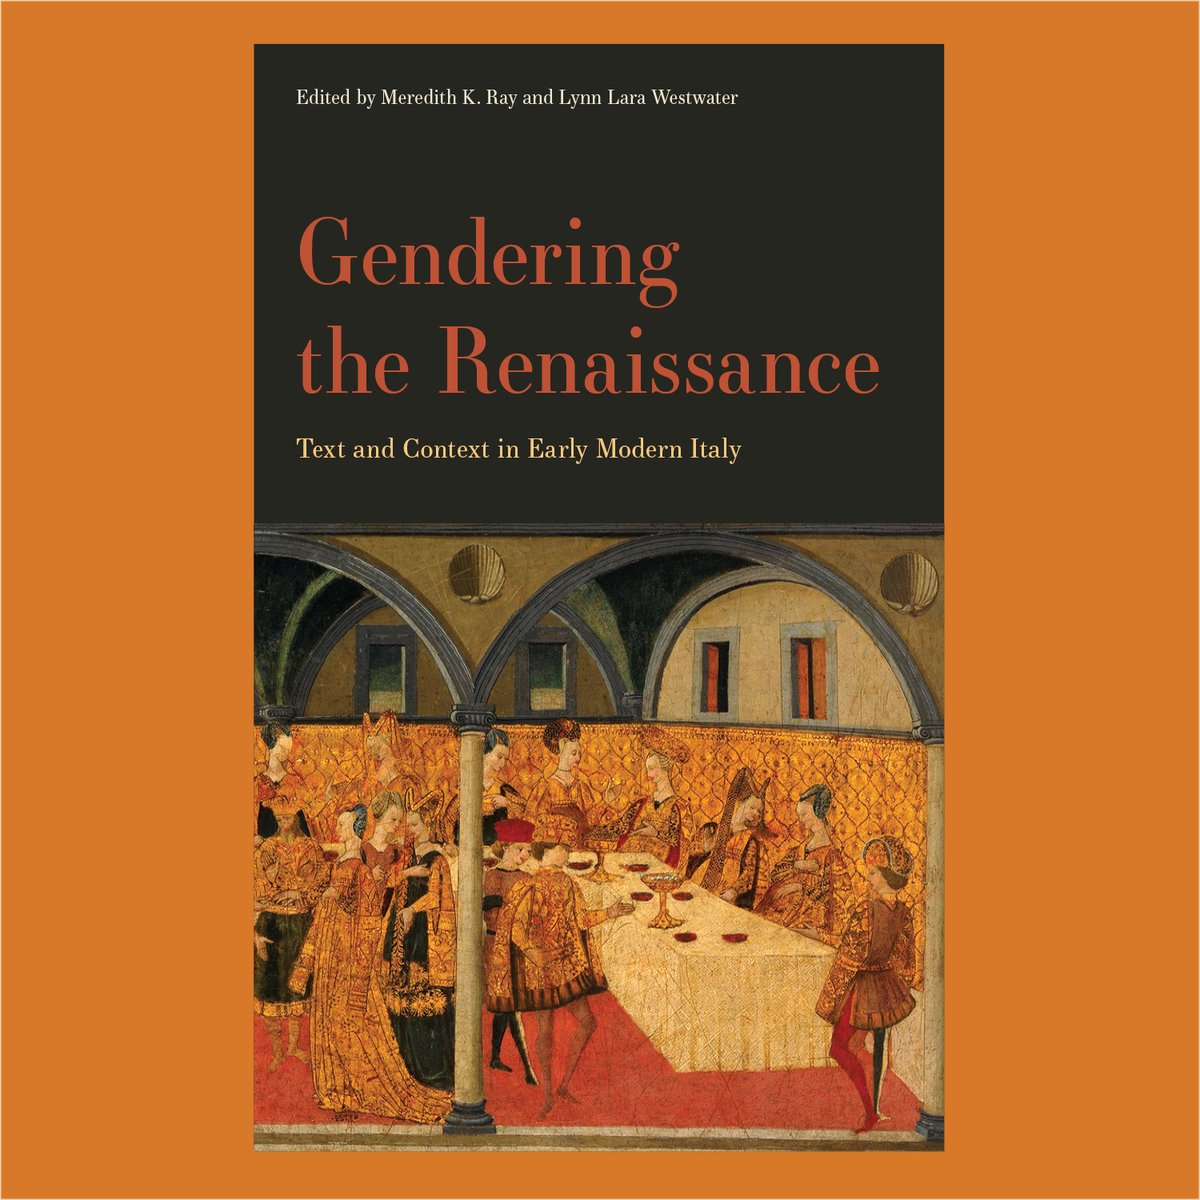 “Gendering the Renaissance: Text and Context in Early Modern Italy”
Edited by Meredith K. Ray and Lynn Lara Westwater

rutgersuniversitypress.org/gendering-the-…

#NewBookAnnouncement #LiteraryStudies #GenderStudies Published by @UDelPress #UniversityOfDelawarePress